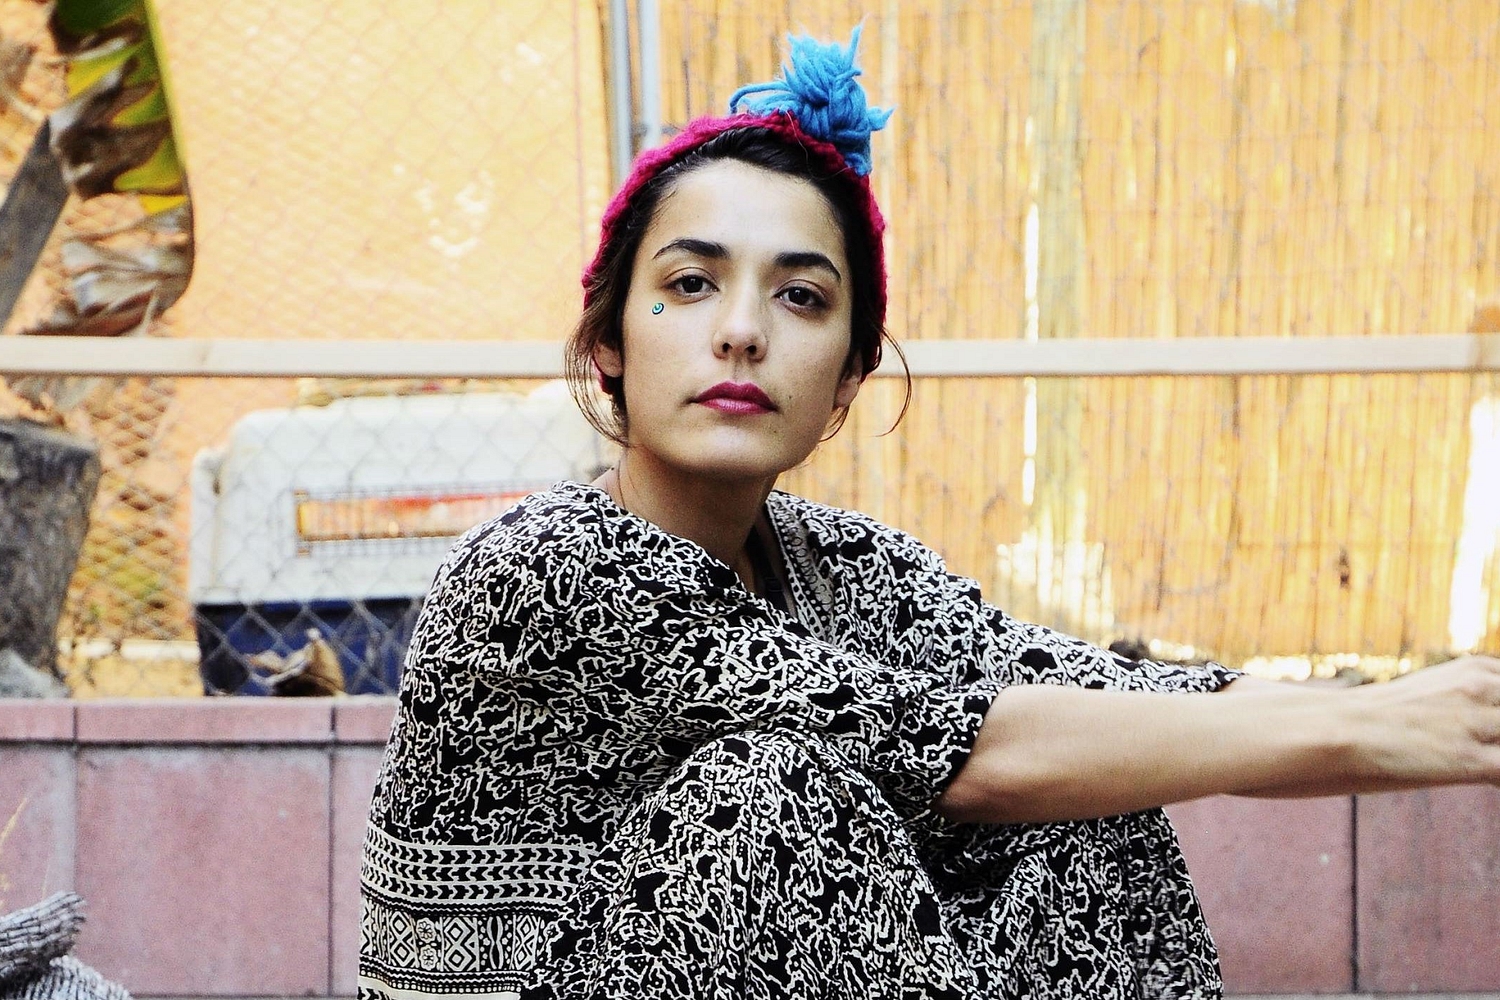 Jennylee: "I’ve thought over the years about trying to find my voice, the voice that’s me"